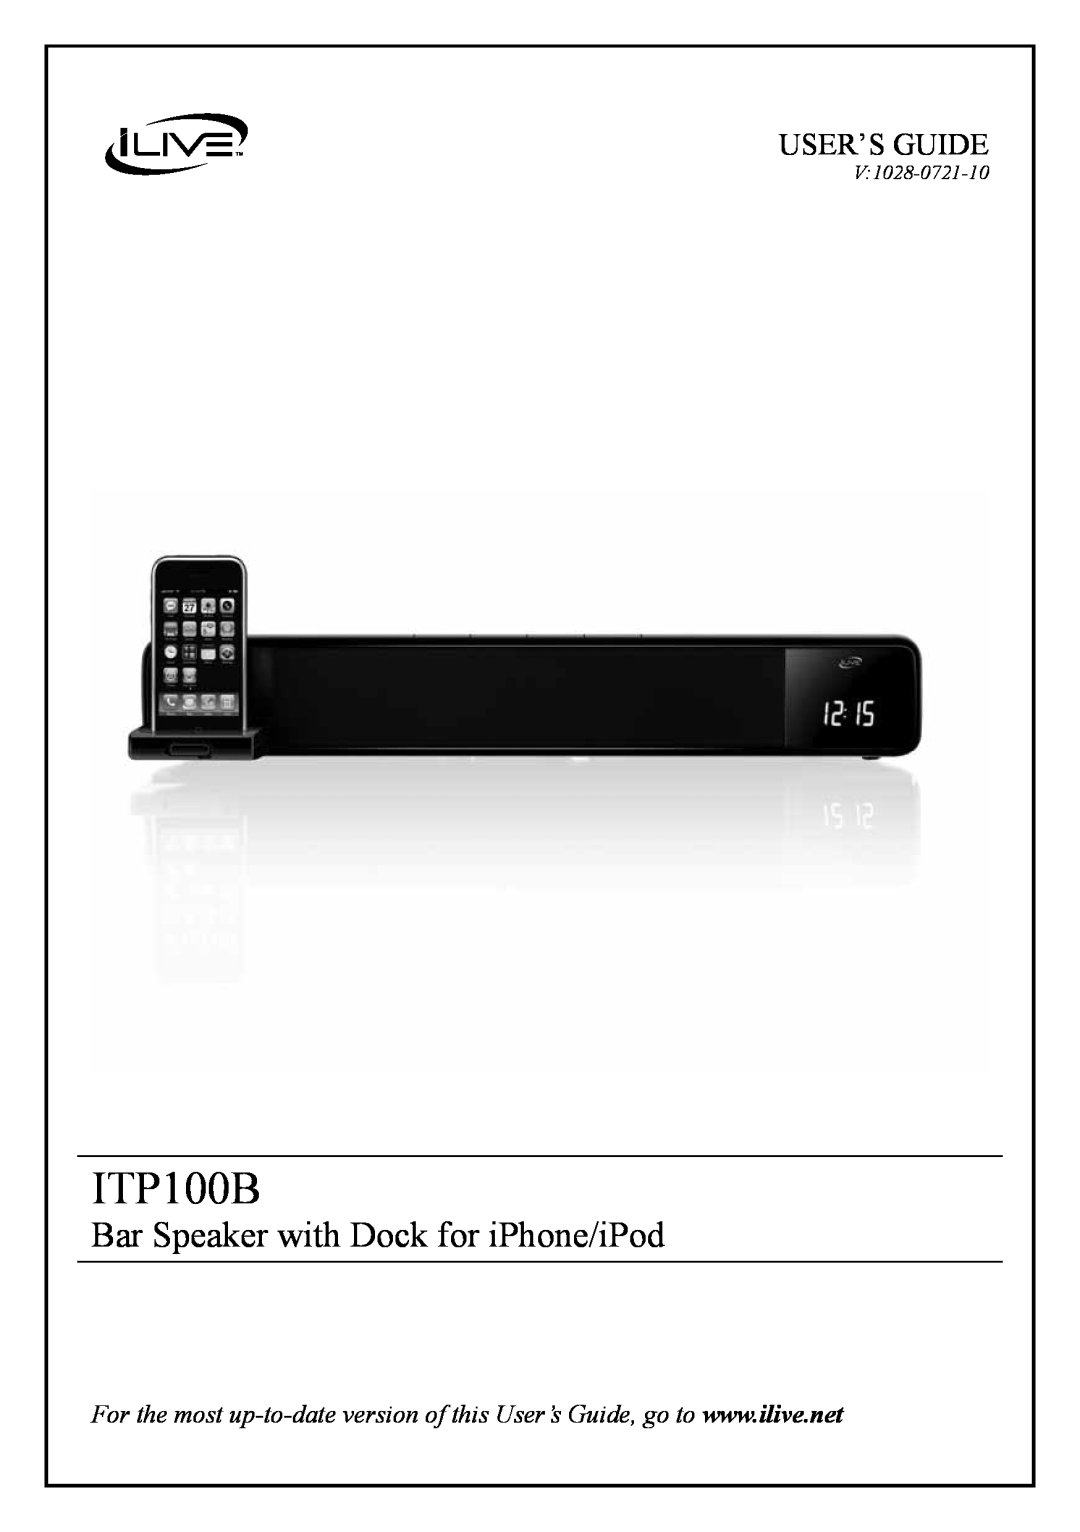 iLive ITP100B manual Bar Speaker with Dock for iPhone/iPod, User’S Guide, V 